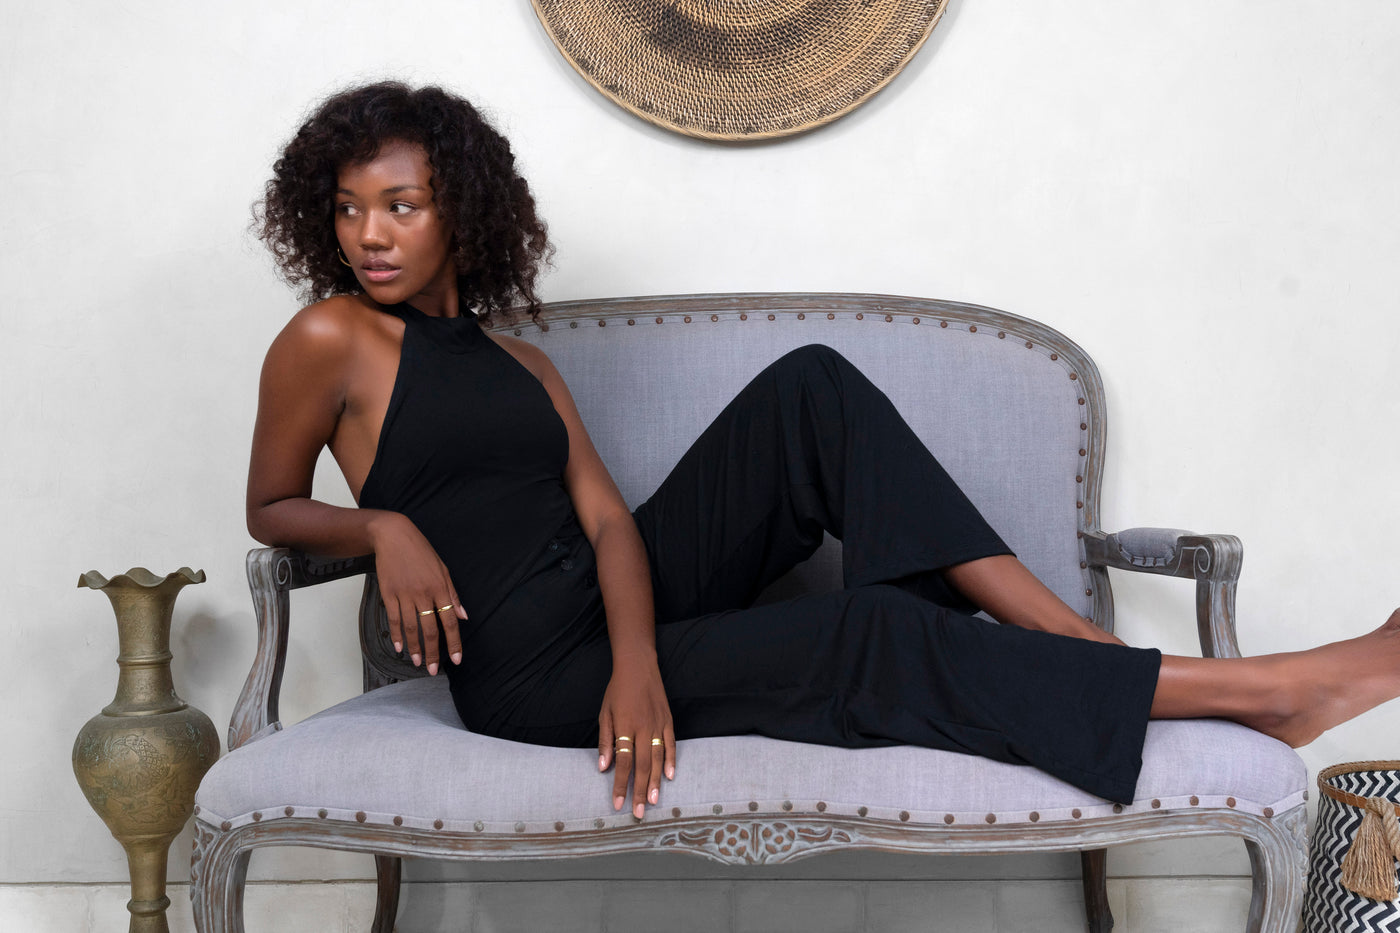 Woman on lounge couch wearing black halter top and black comfy trousers from Ekoluxe sustainable loungewear brand.